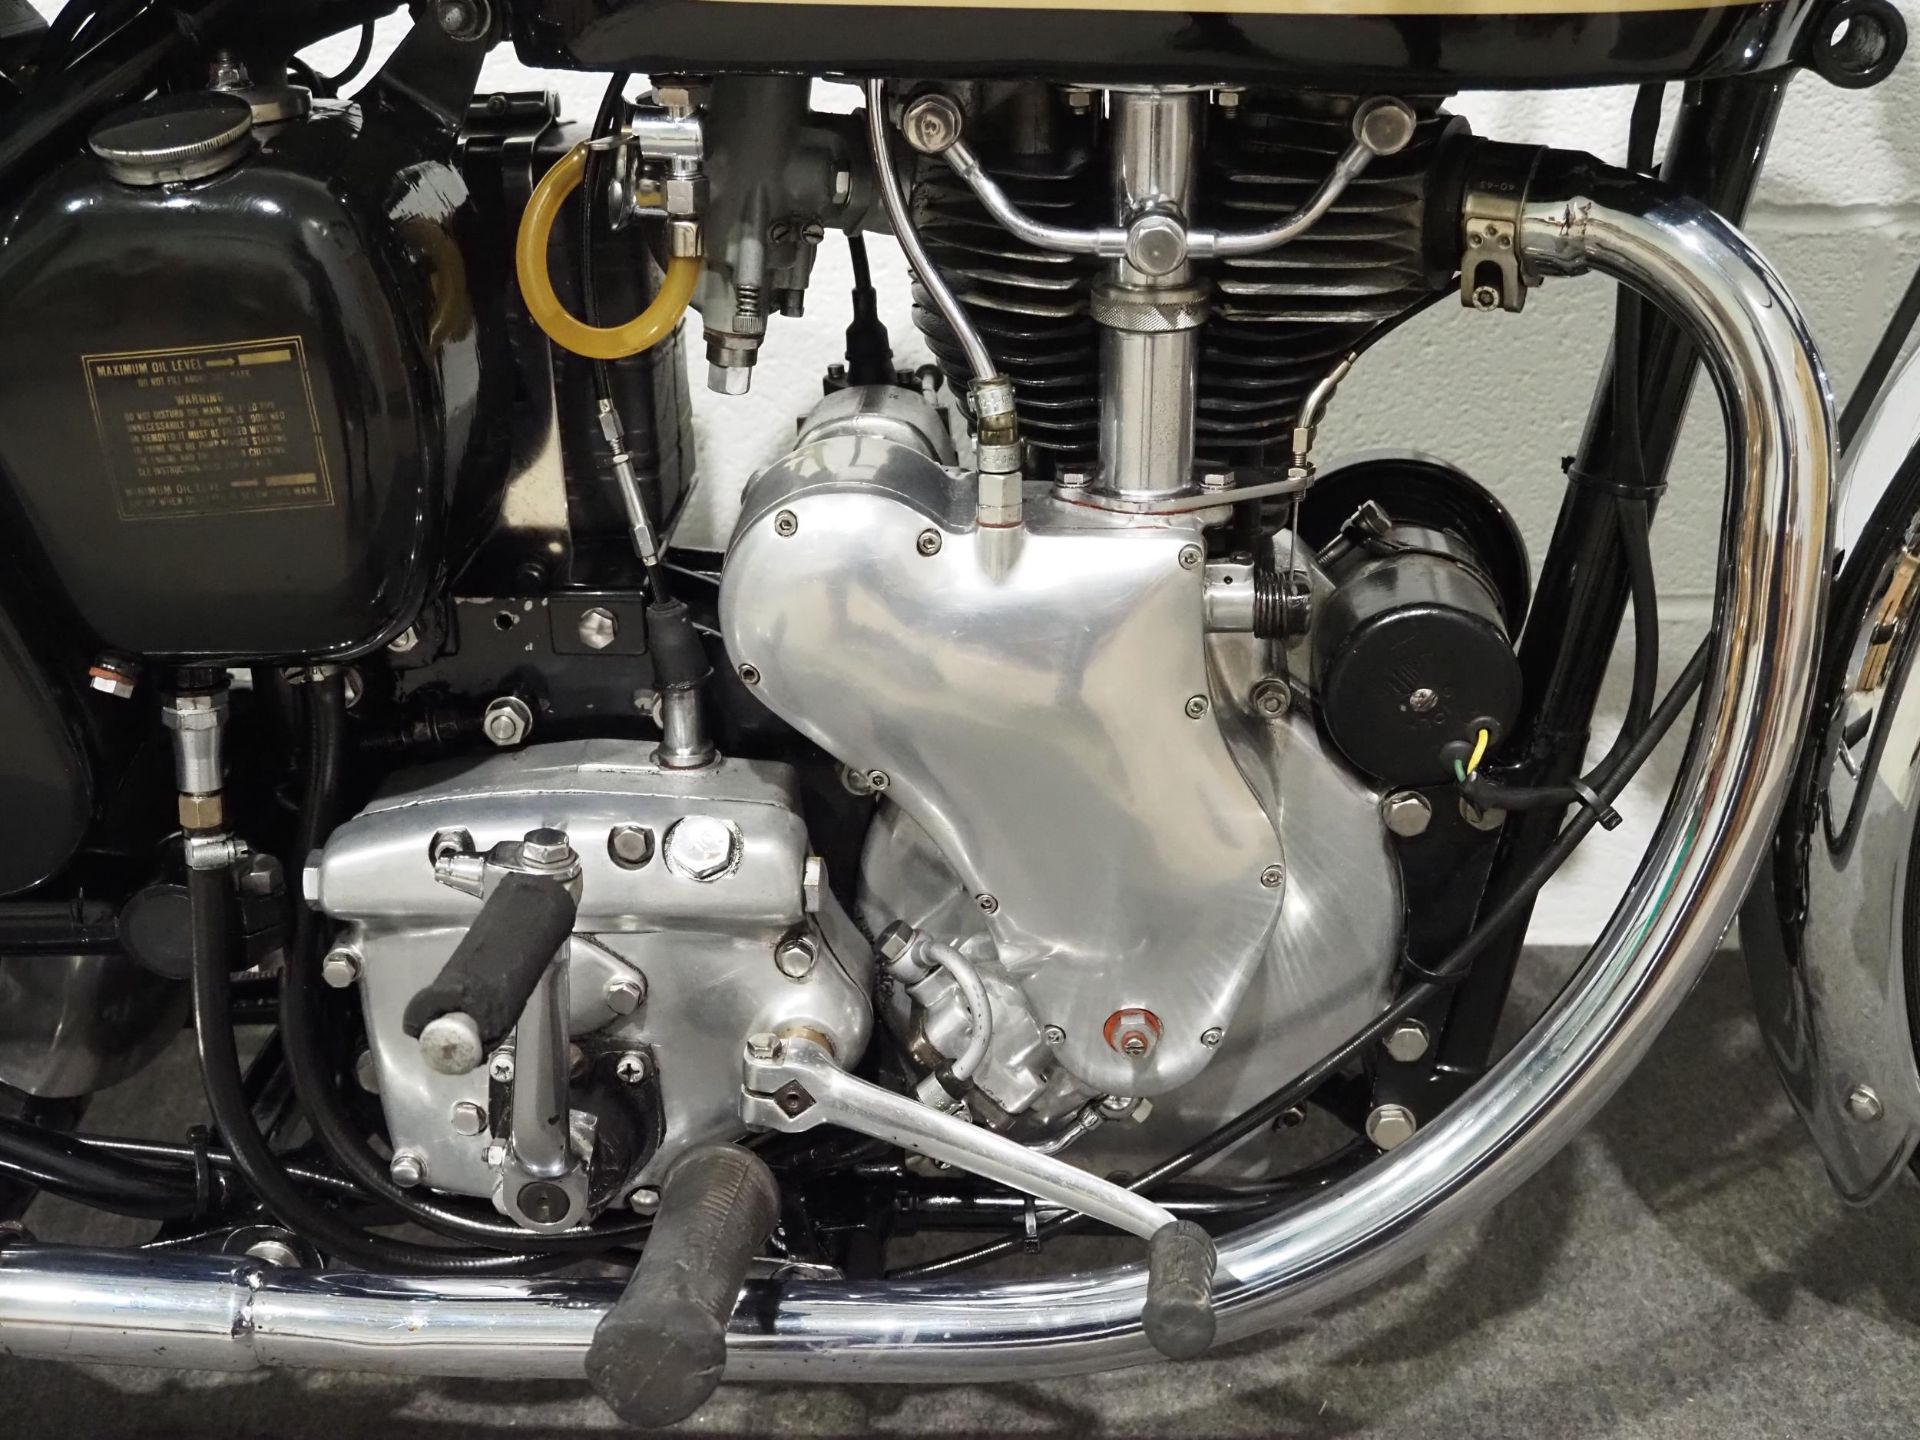 Velocette Viper motorcycle, 1960, 349cc Frame no. RS14336 Engine no. VR2792 Runs and rides well, - Image 2 of 7